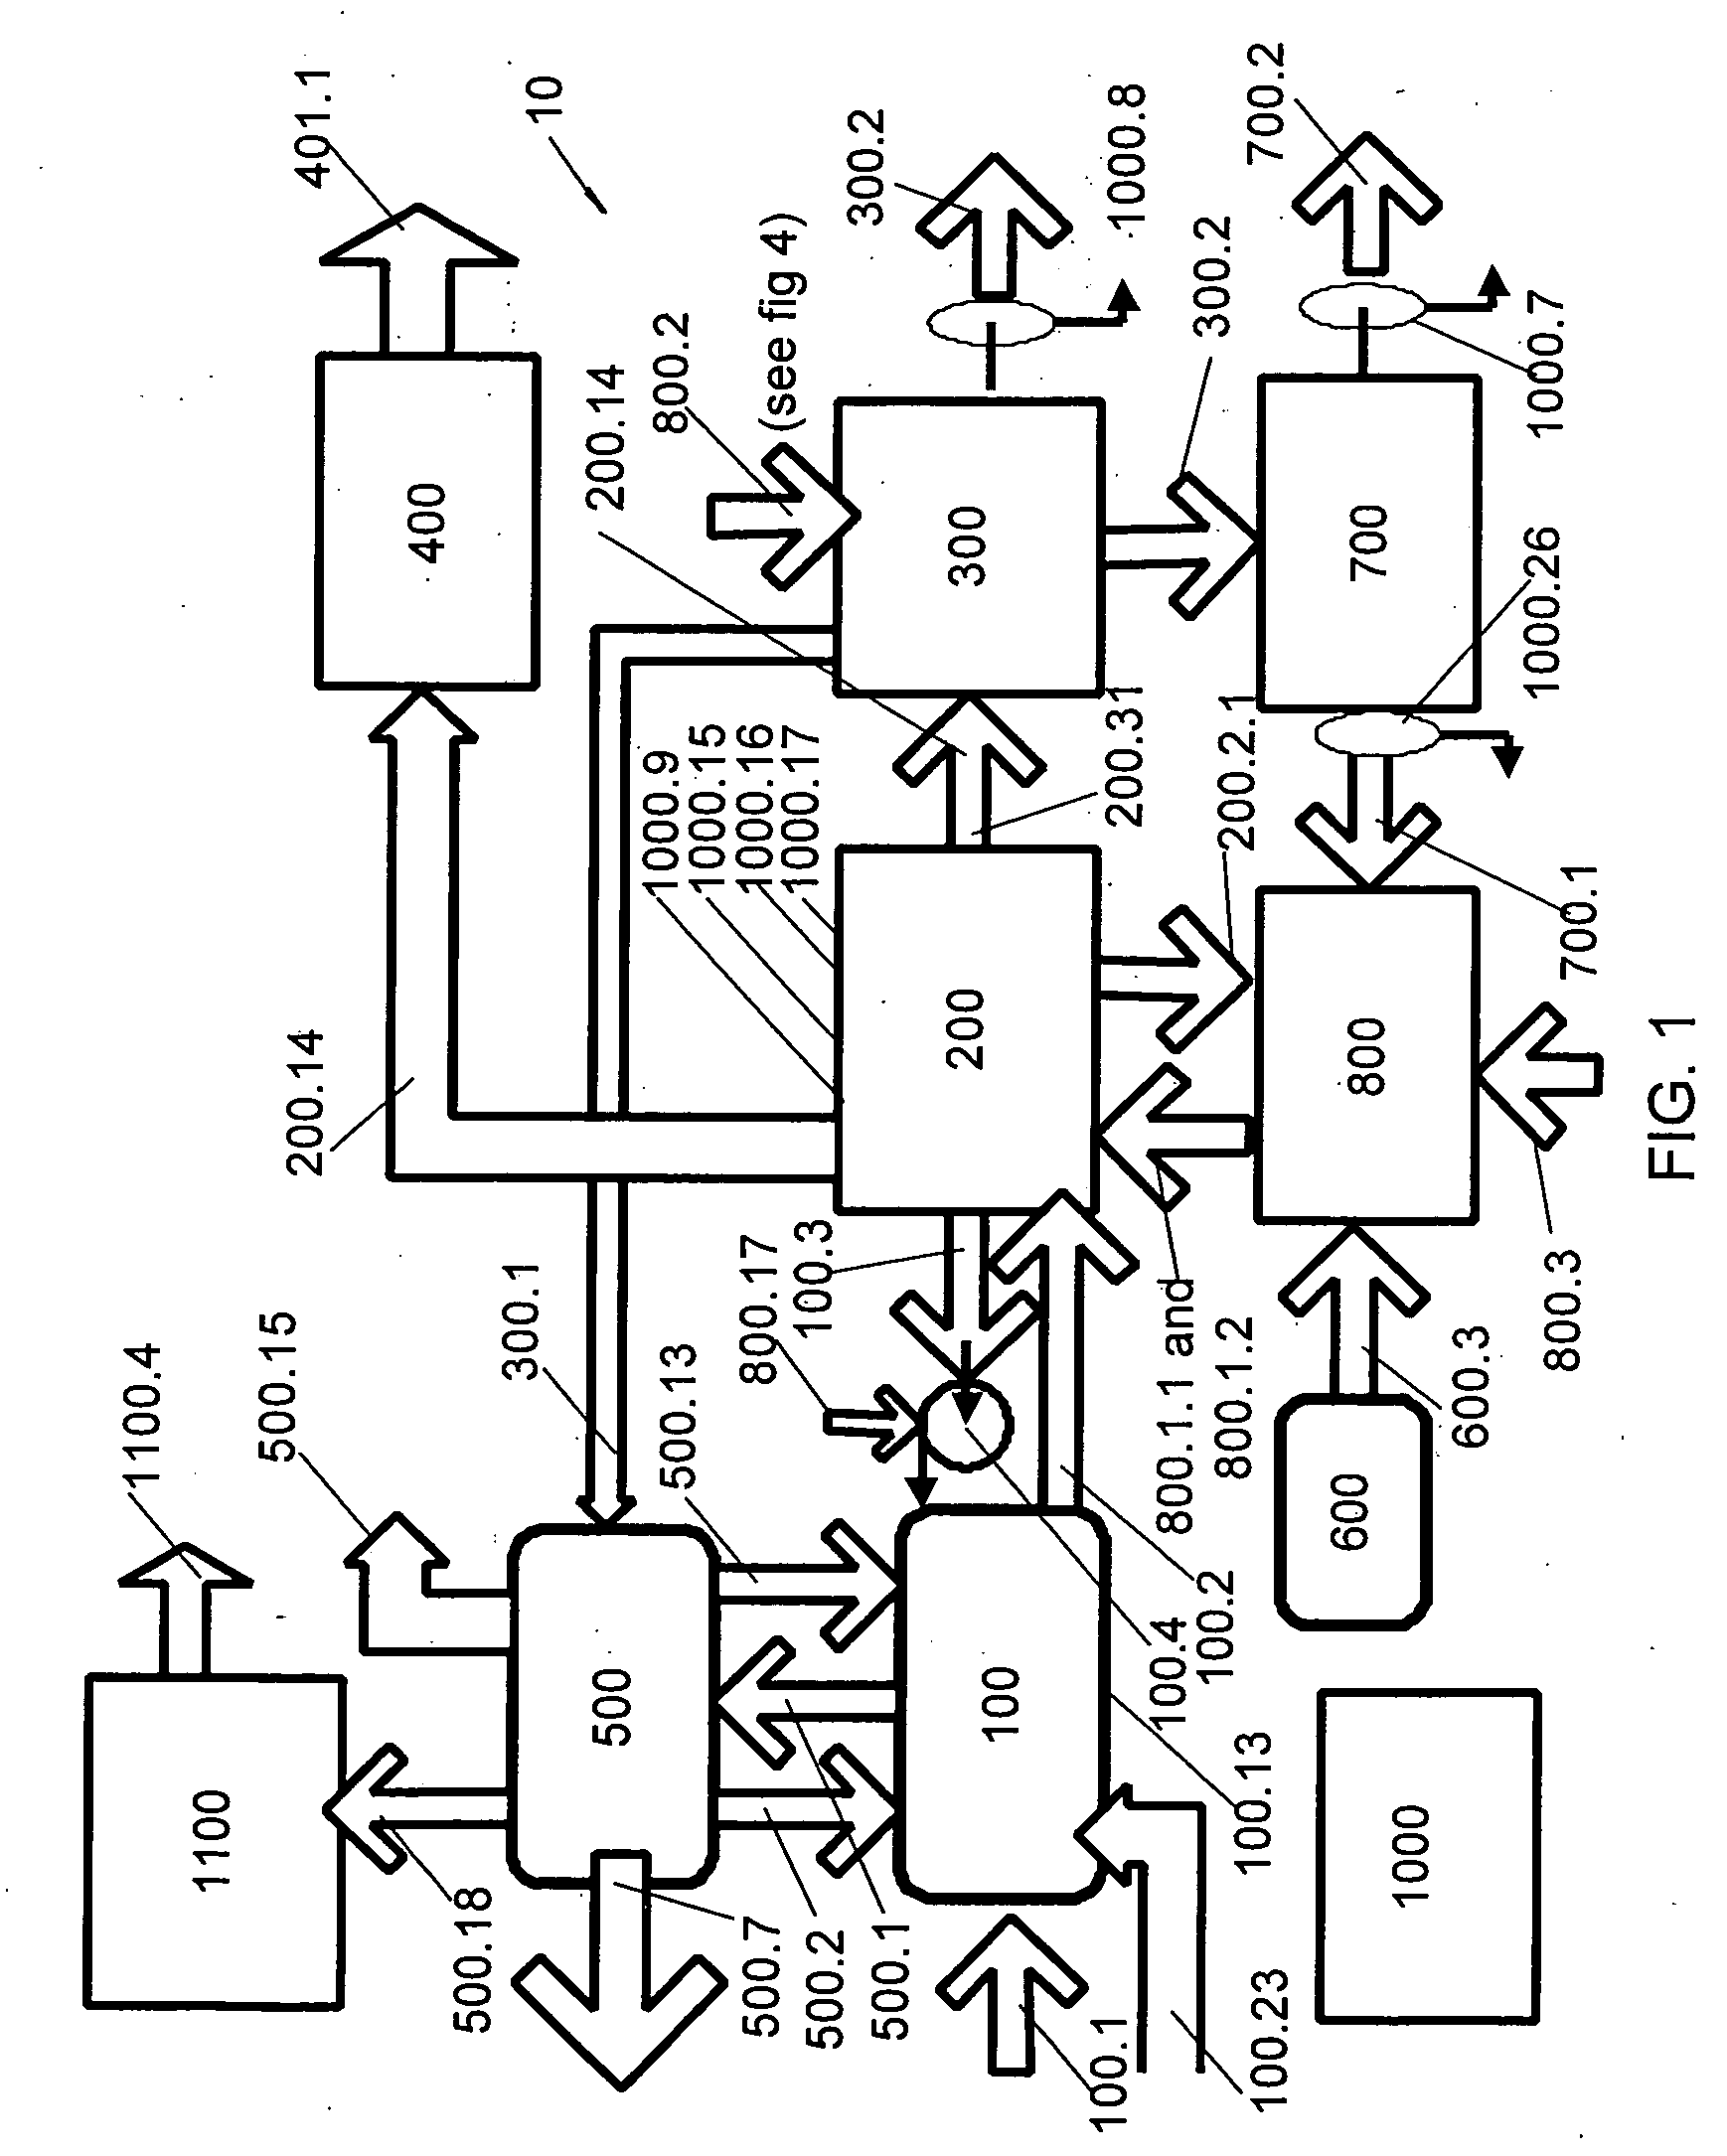 Arc-hydrolysis fuel generator with energy recovery